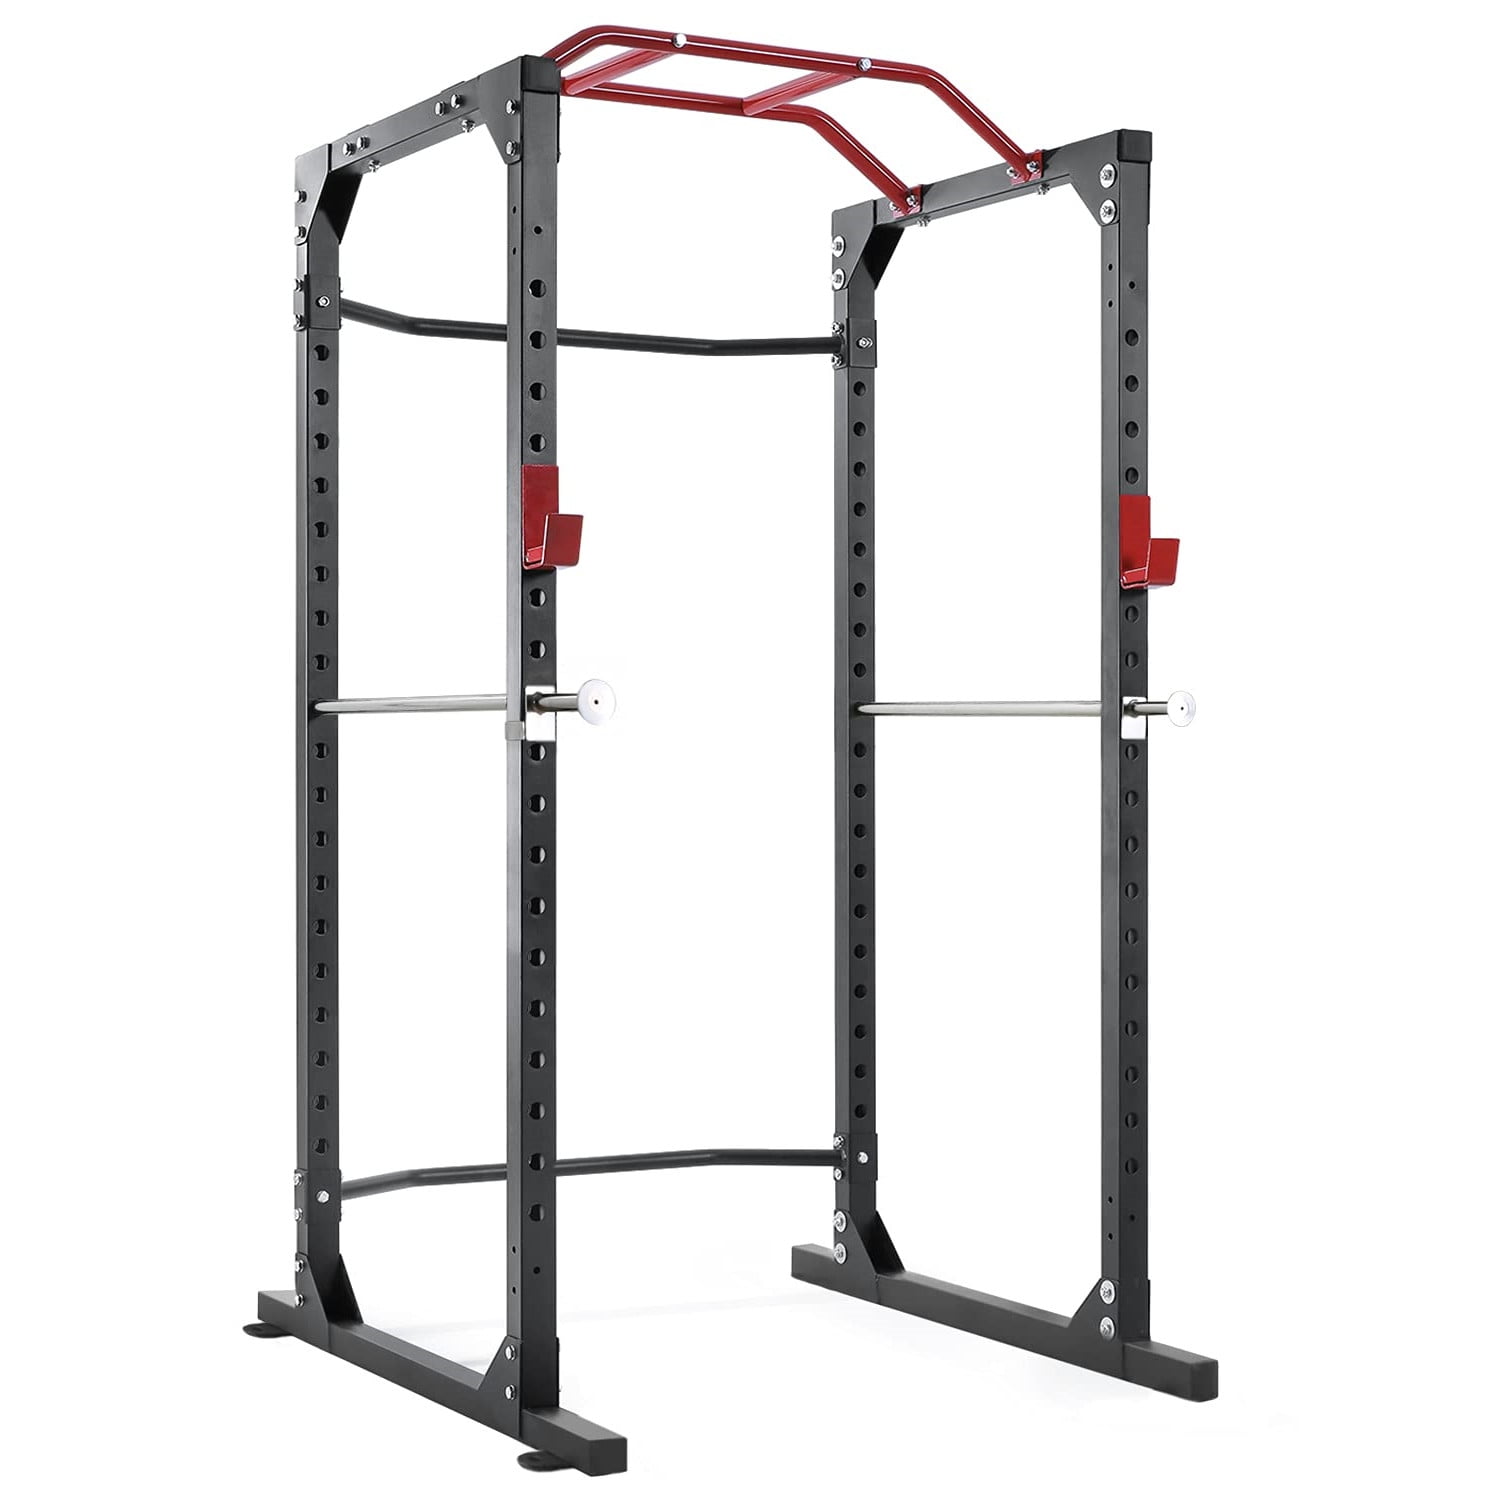 Details about   Squat Rack Bench Press Power Adjustable Weight Rack Barbell Stand Gym Home USA 